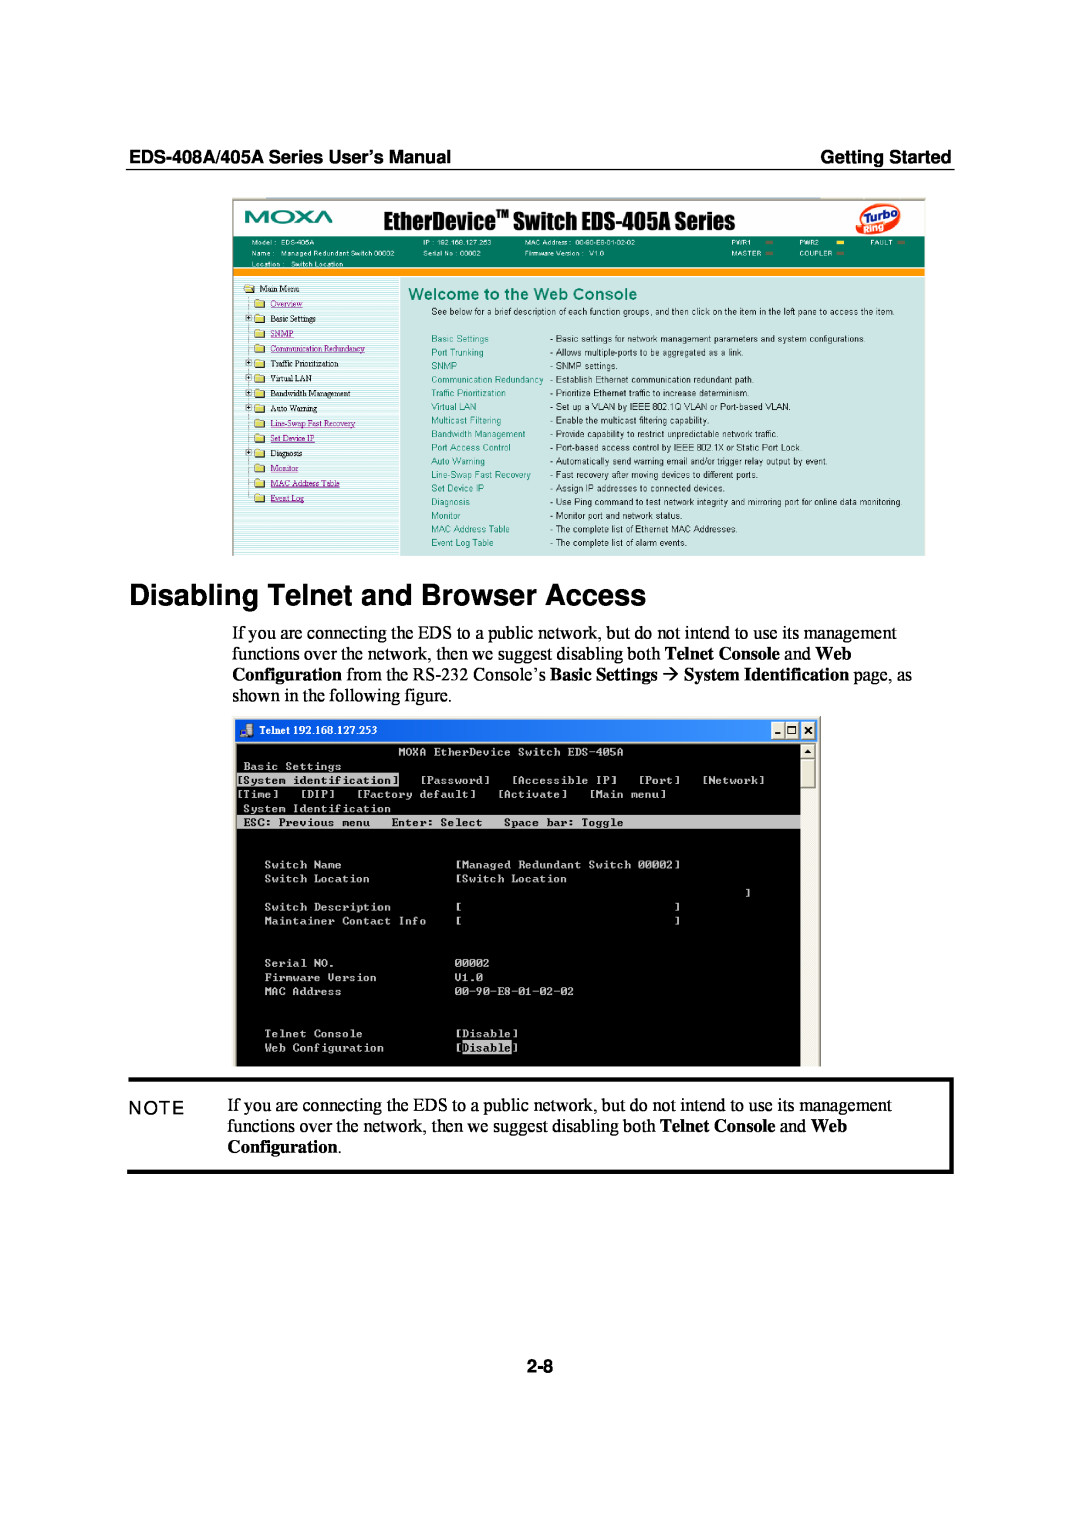 Moxa Technologies EDS-405A Disabling Telnet and Browser Access, Configuration, EDS-408A/405A Series User’s Manual 